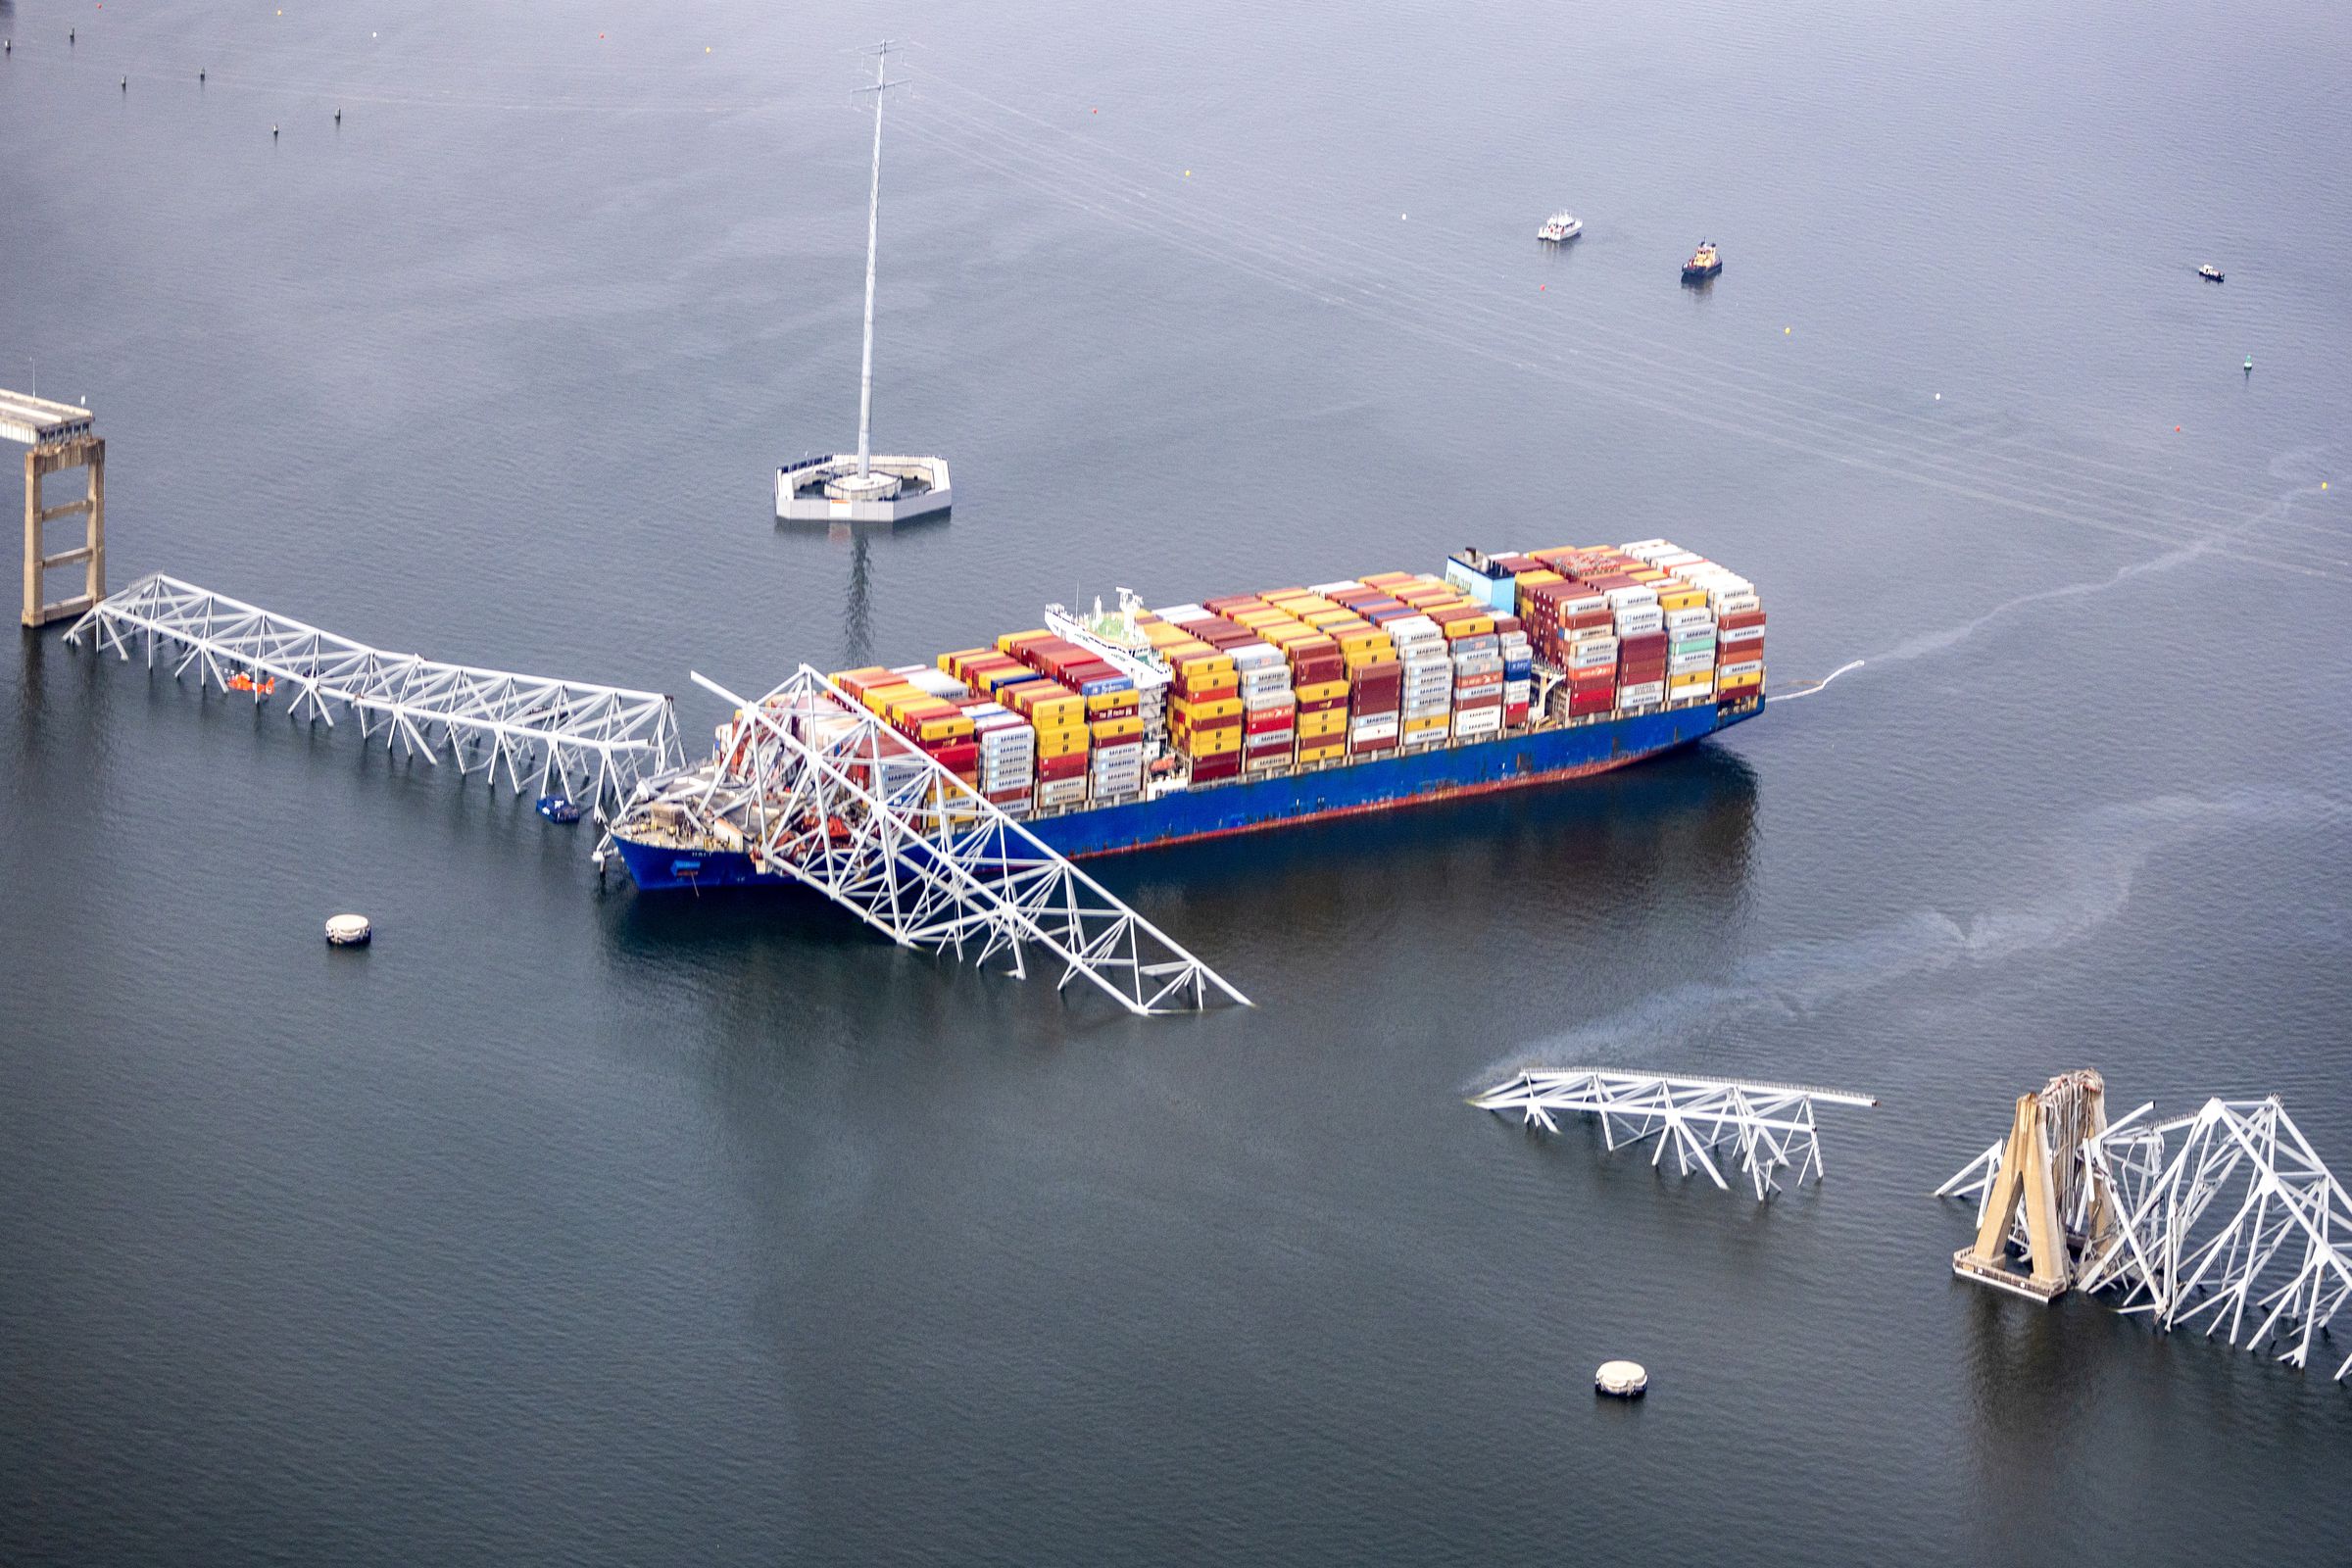 A photo showing Baltimore’s Francis Scott Key Bridge collapsed after being struck by the MV Dali cargo ship